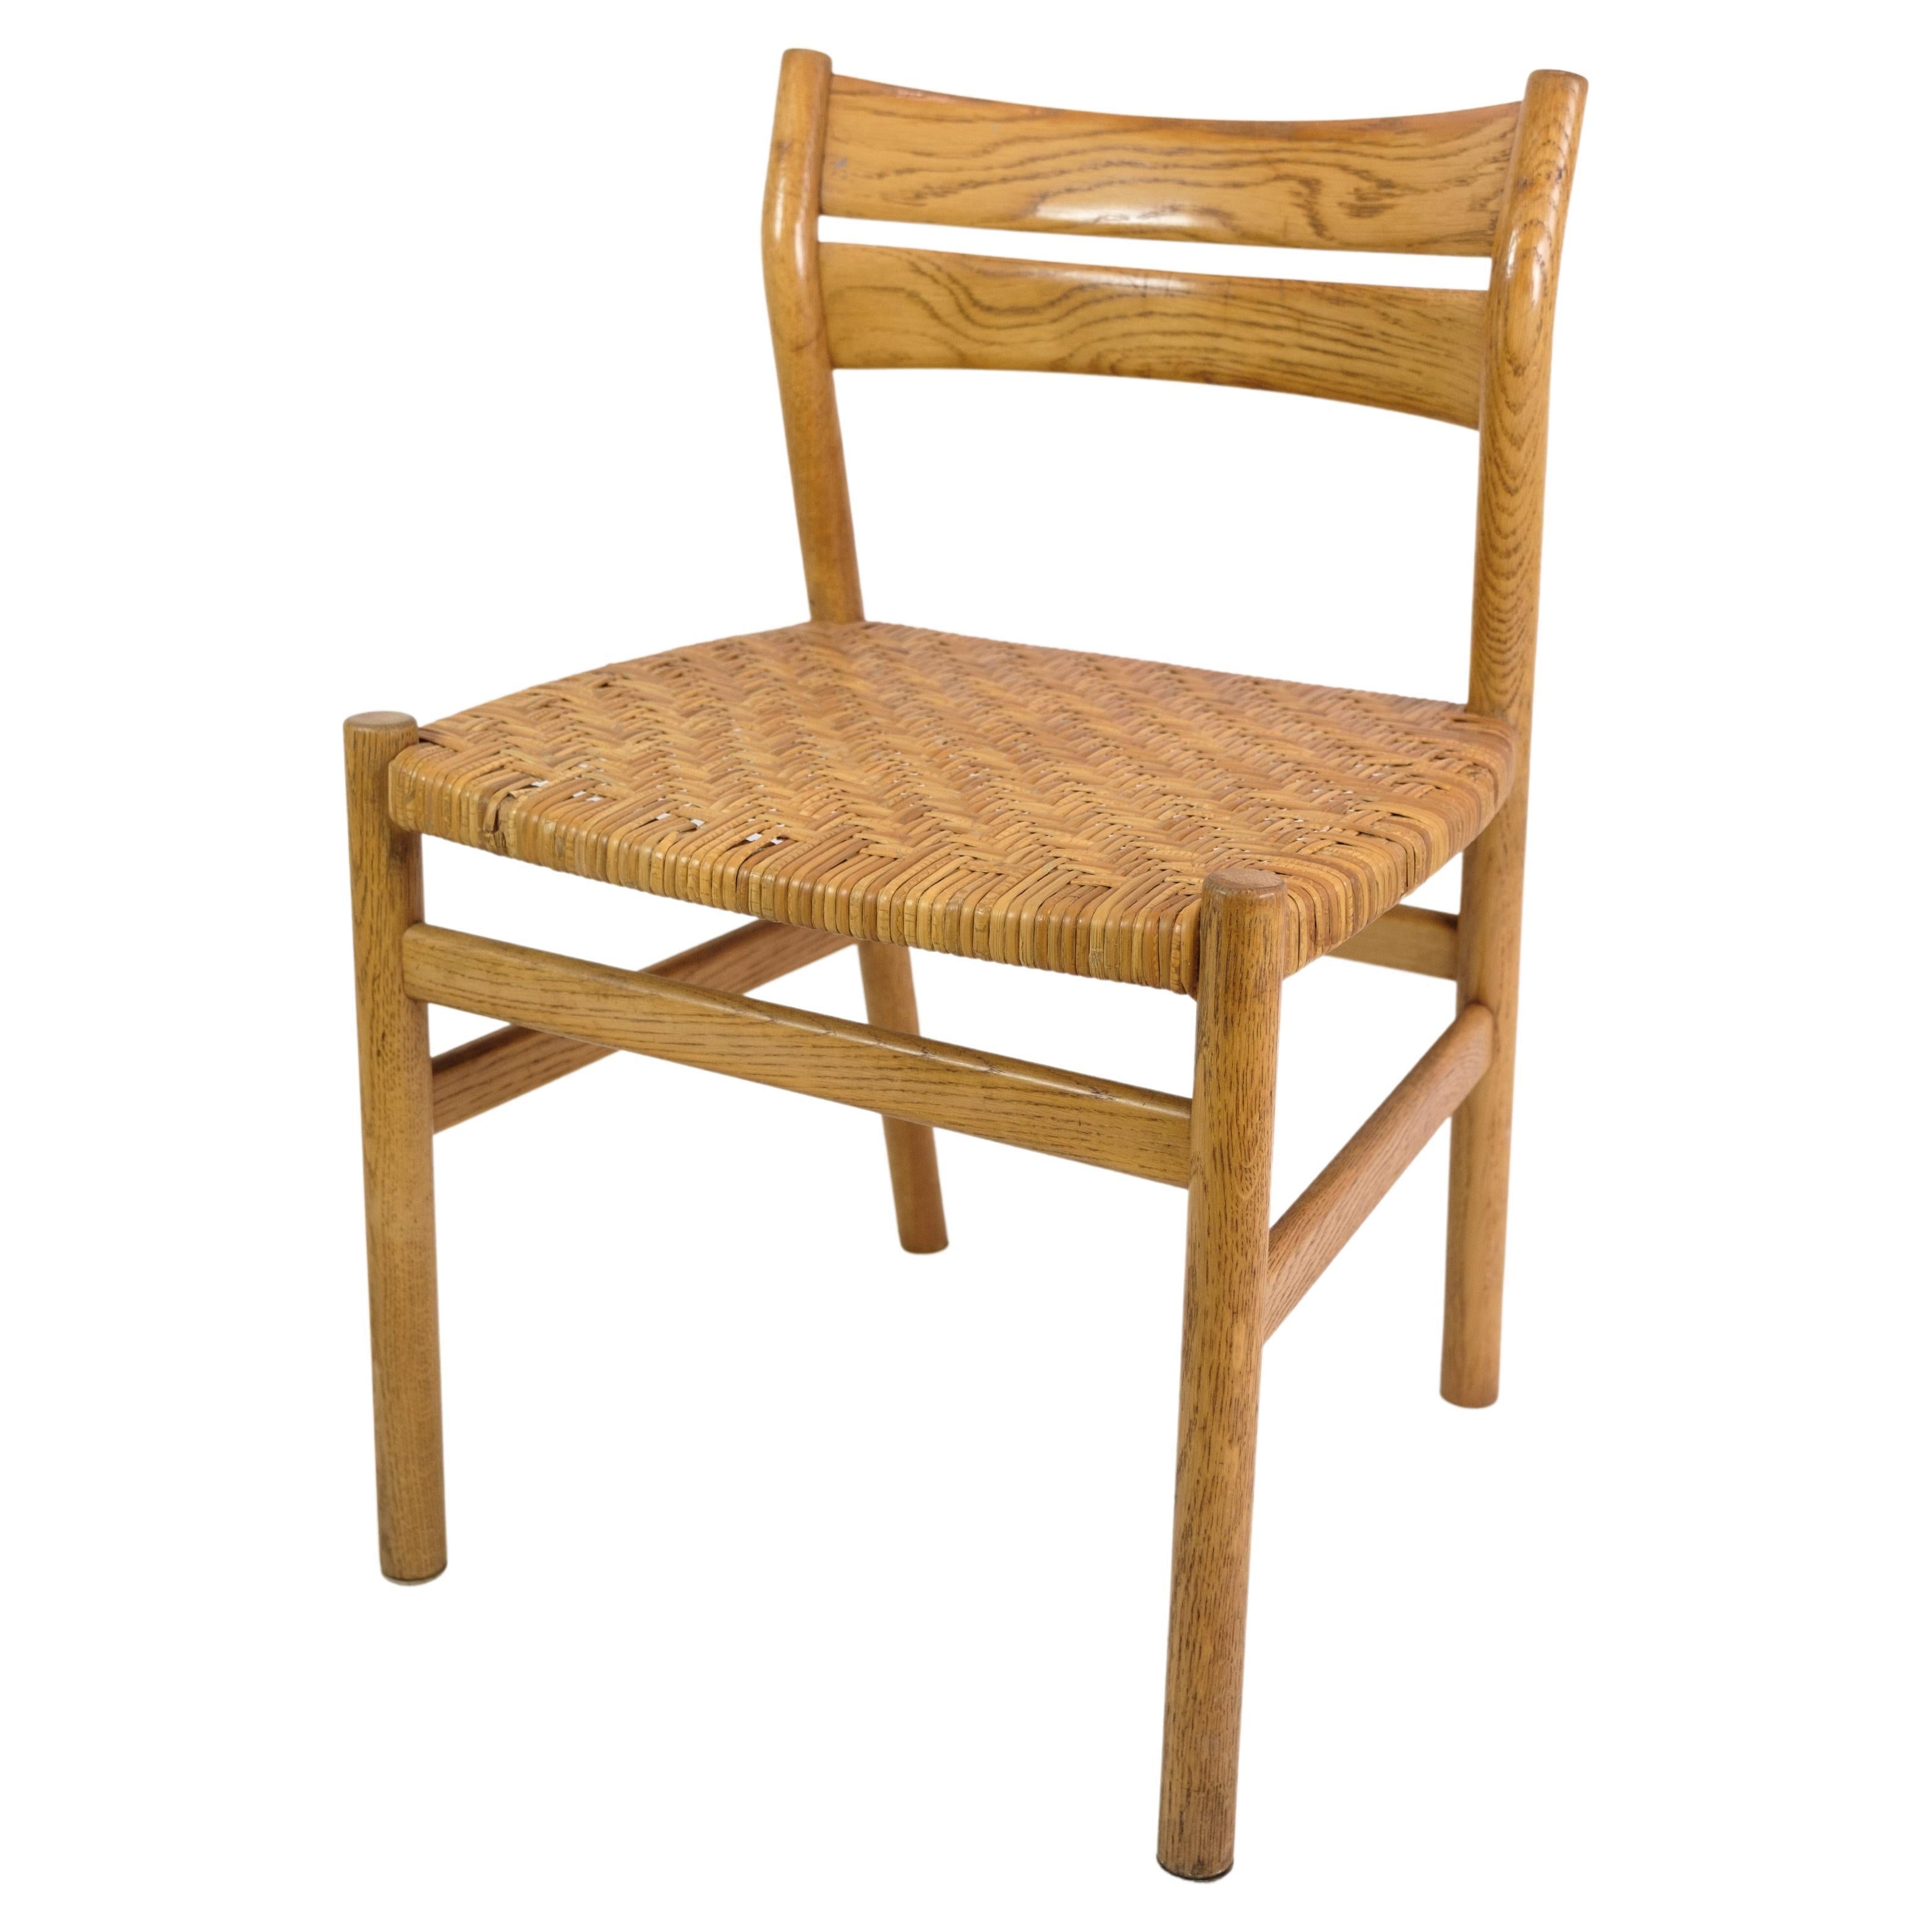 Set of four dining chairs in oak and seat in wicker, designed by Børge Mogensen and produced by C.M Madsen Møbelfabrik in the 1960s. The chairs are in nice vintage condition. Their simple and timeless design makes them suitable for a range of